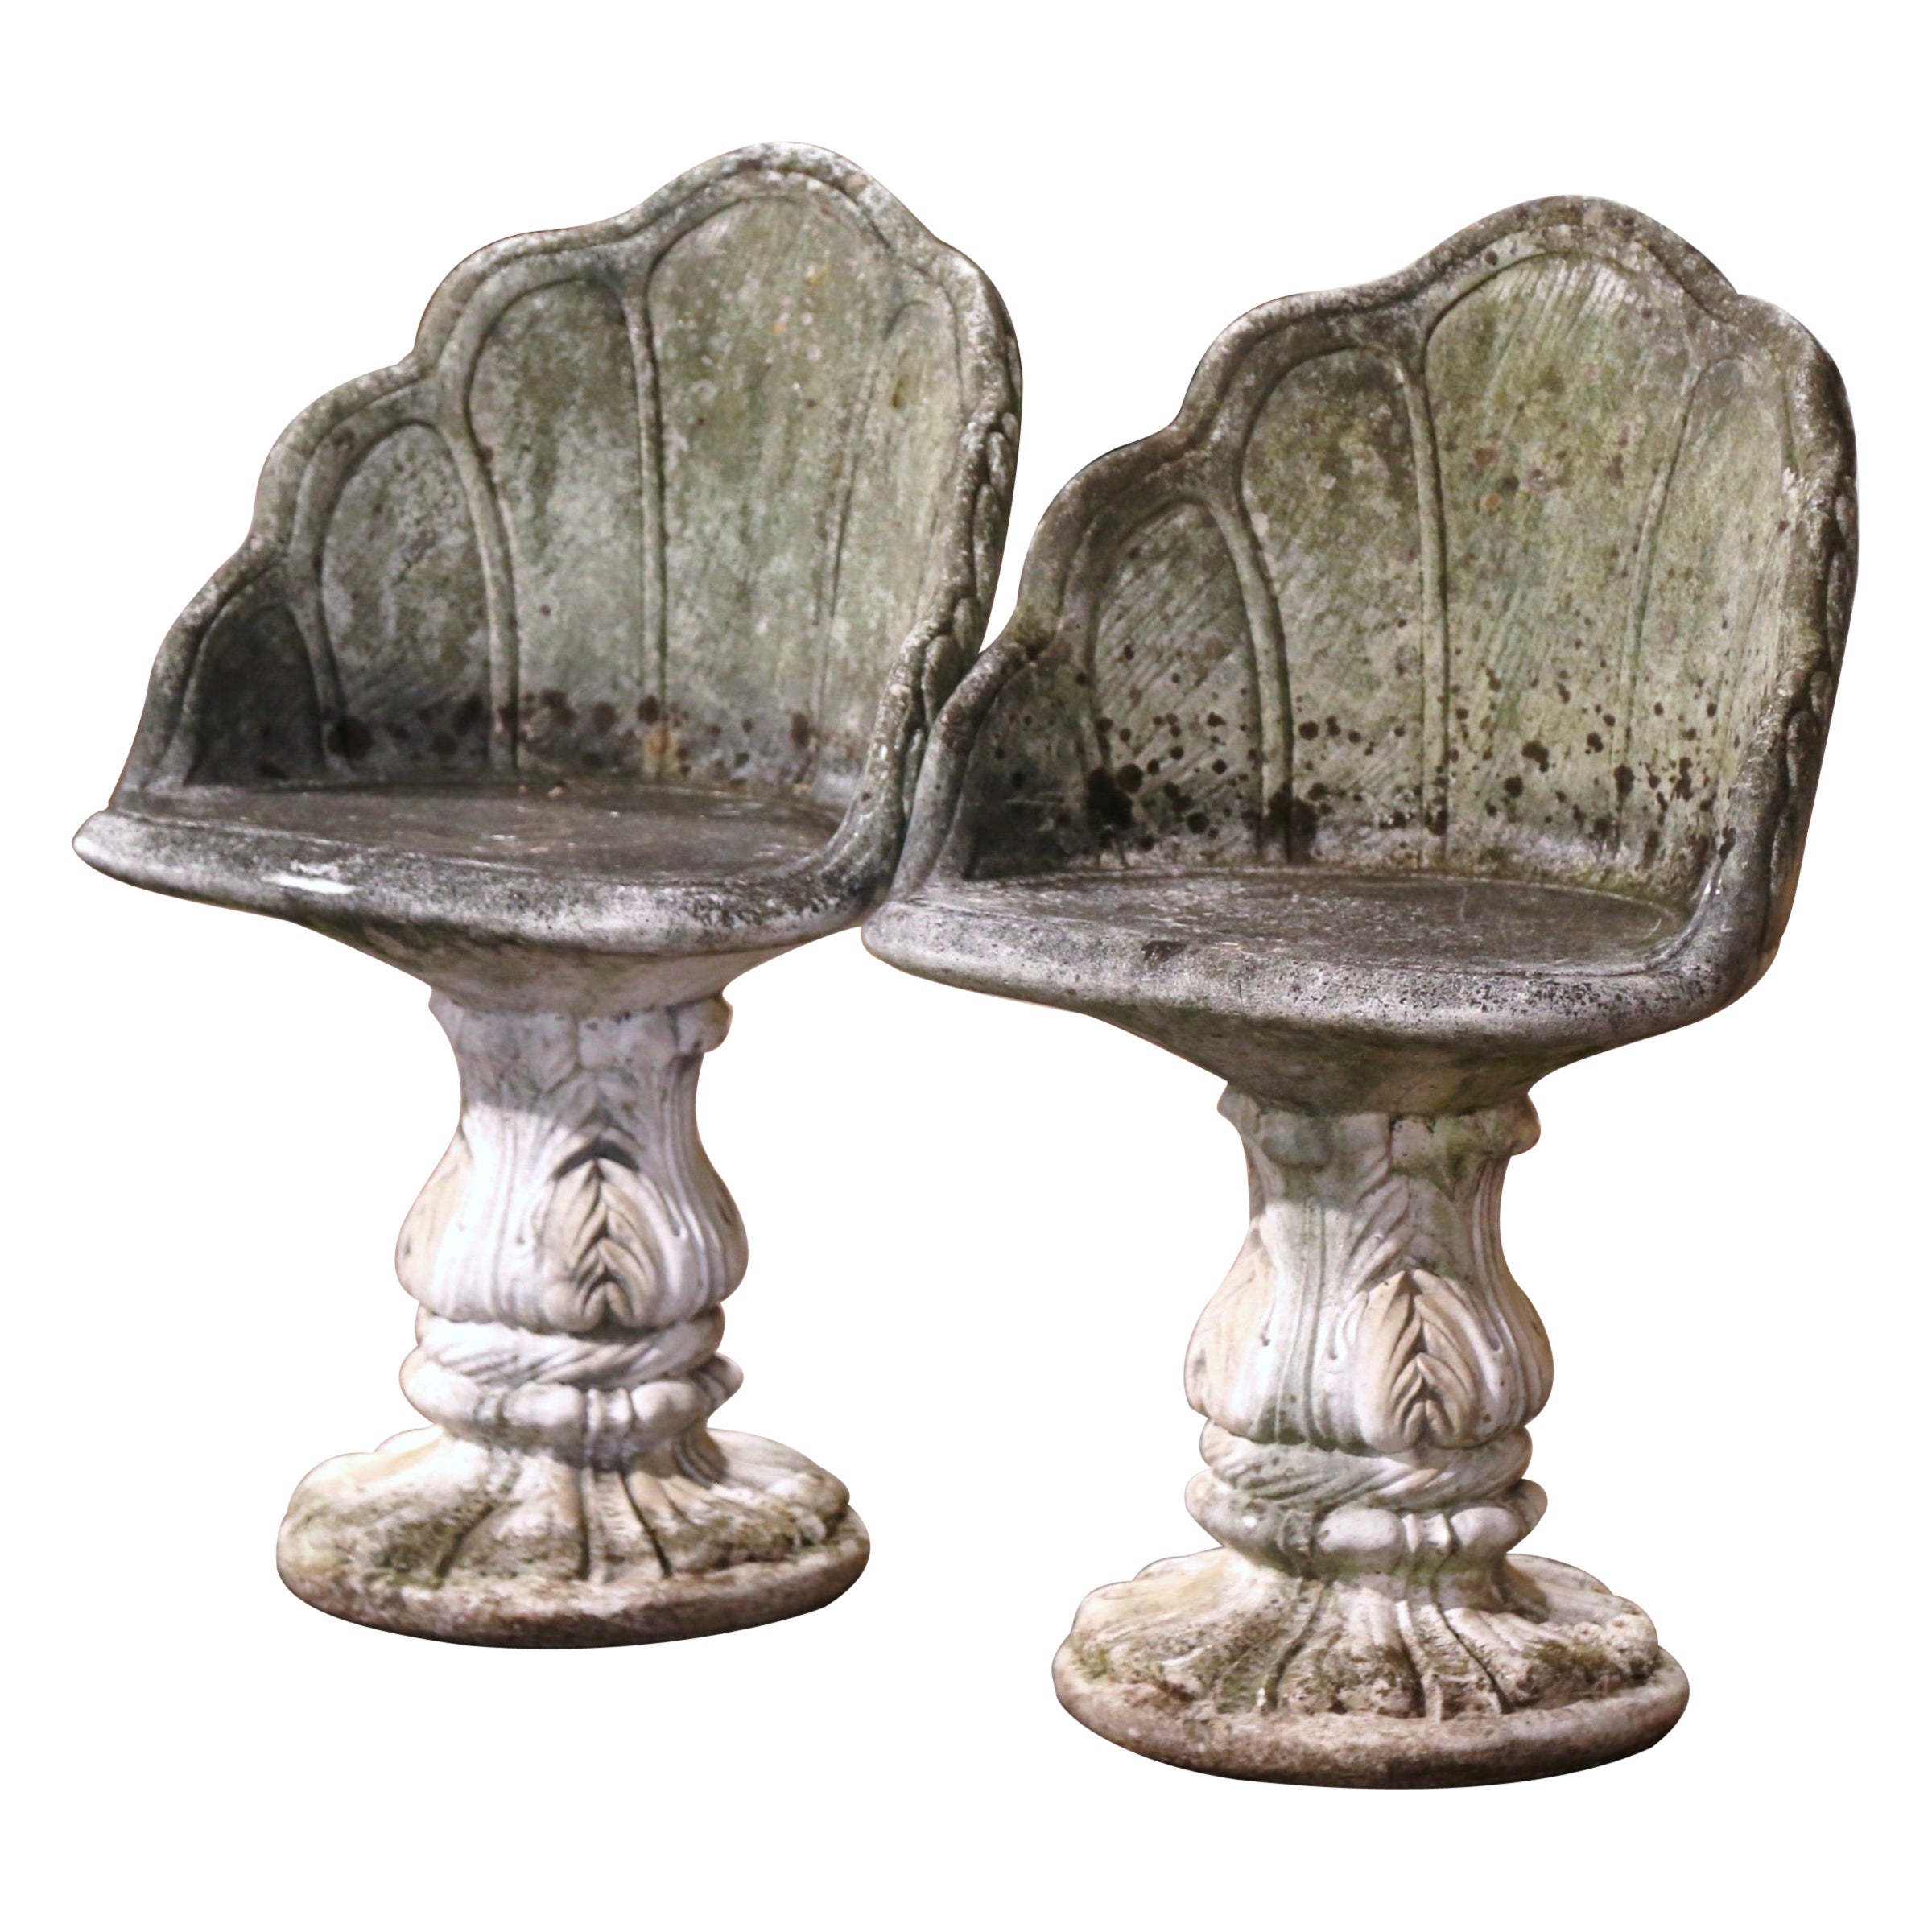 Pair of Mid Century Carved Stone Garden Chairs with Seashell Motifs For Sale